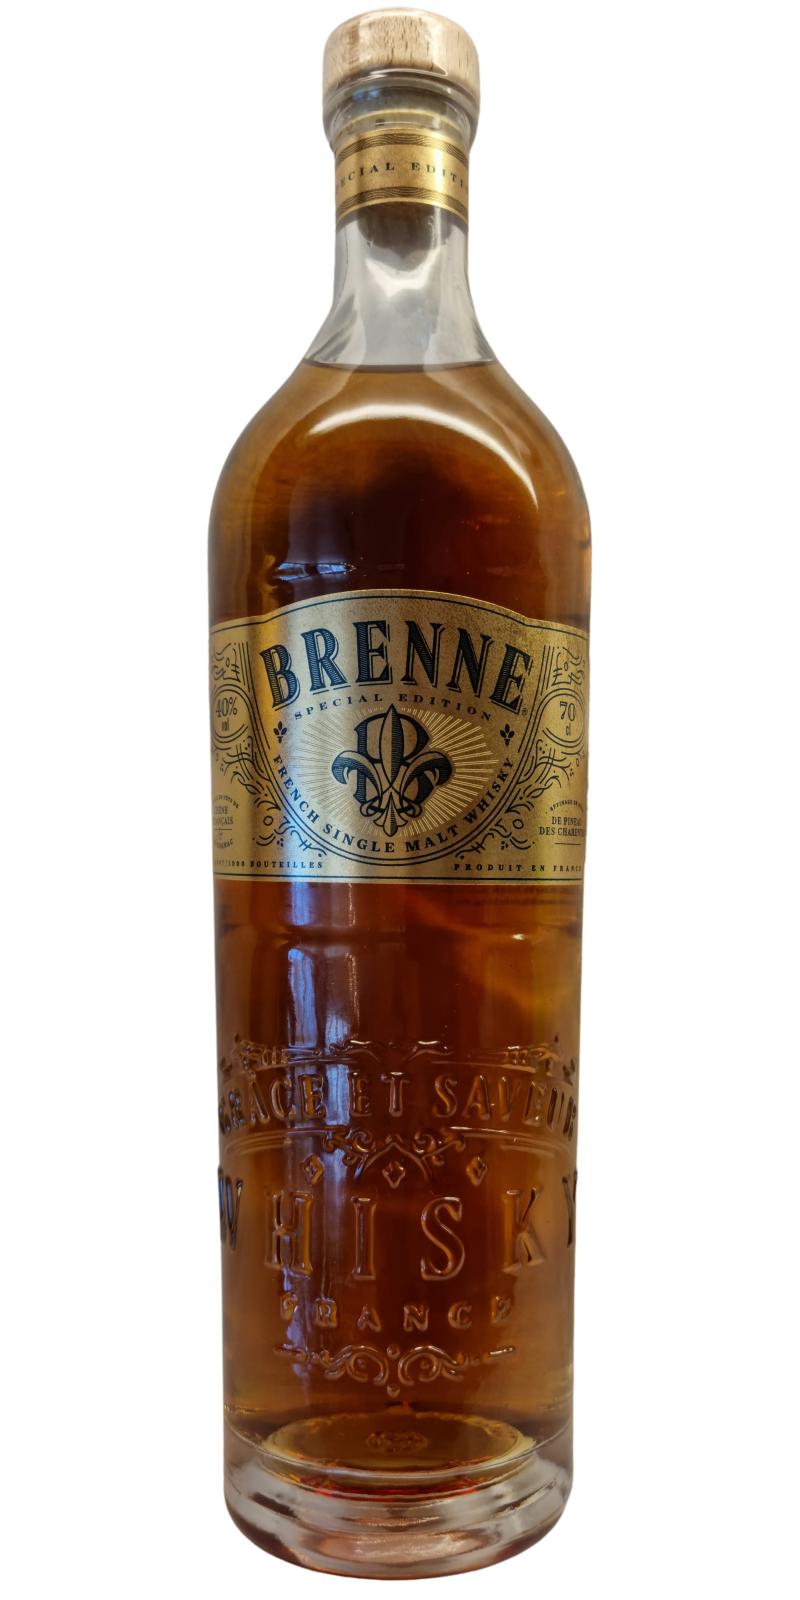 Brenne Special Edition